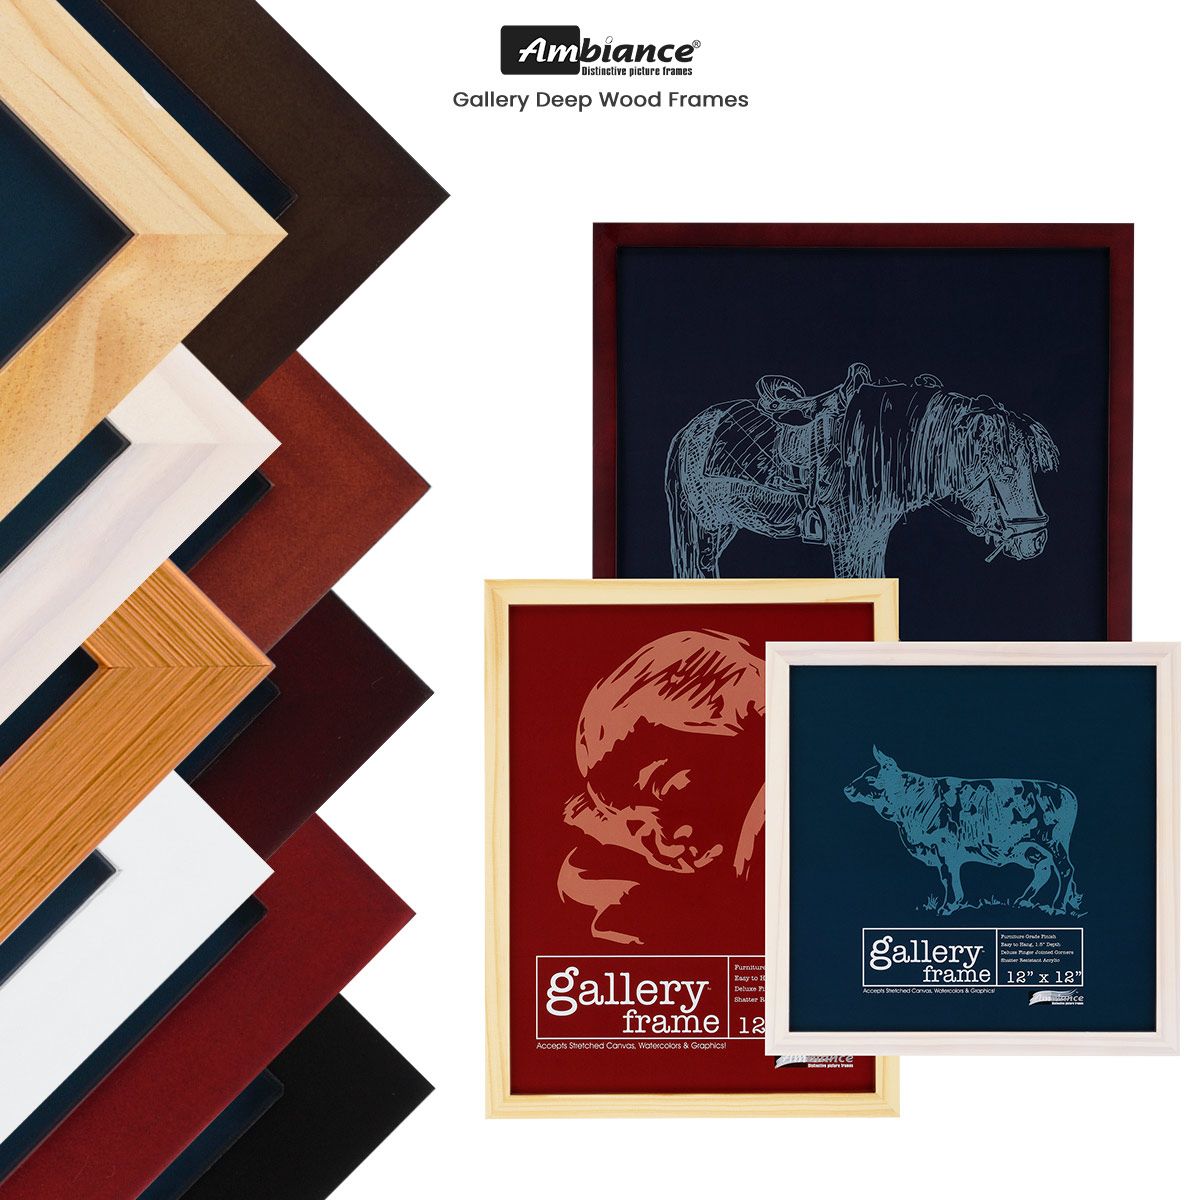 Ambiance Gallery 1-1/2" Deep Wood Frames